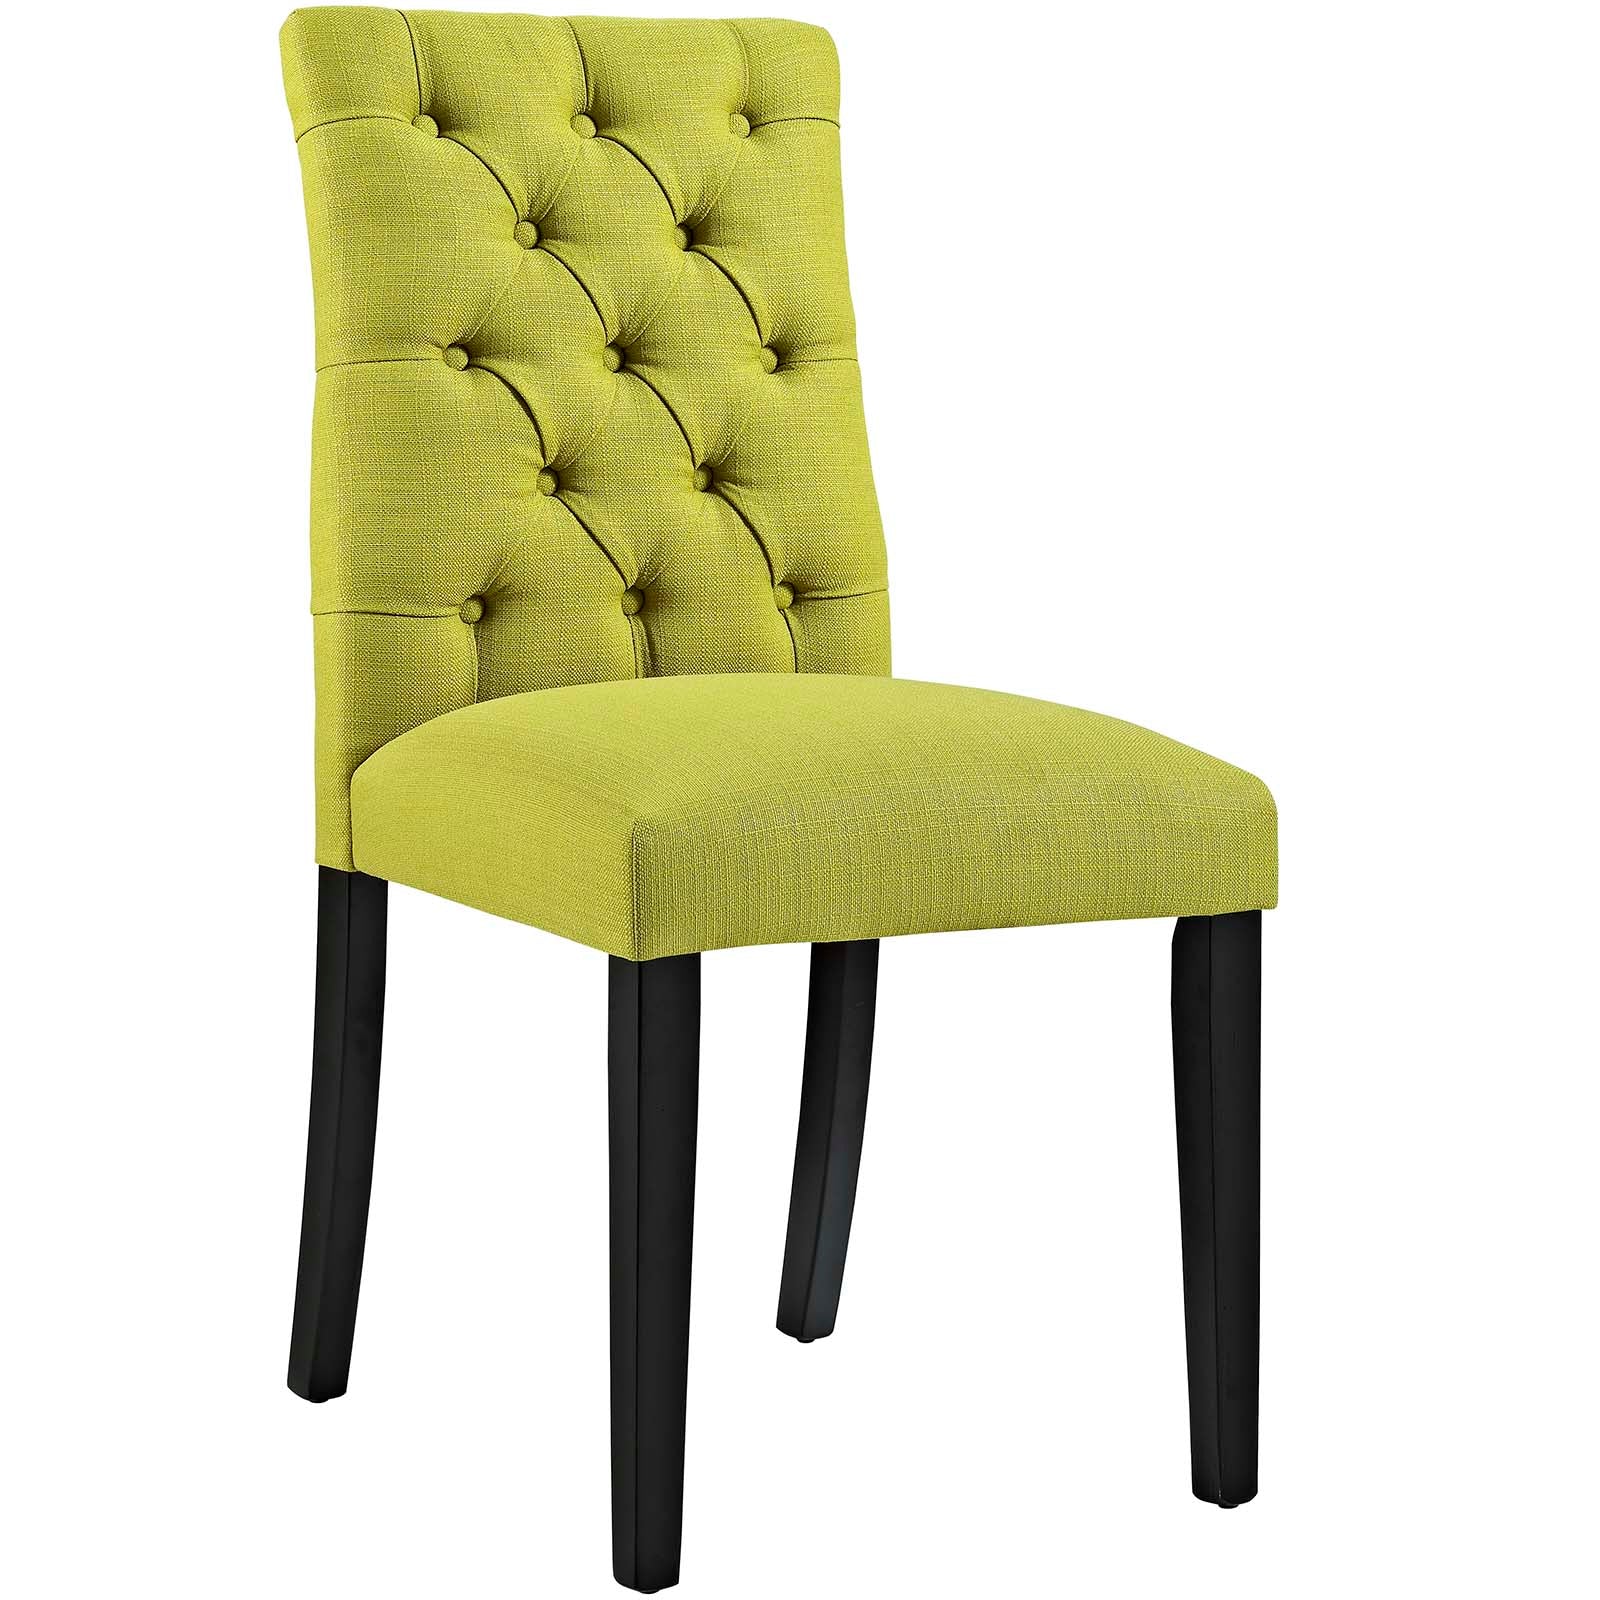 Modway Dining Chairs - Duchess Dining Chair Fabric Set of 2 Wheatgrass